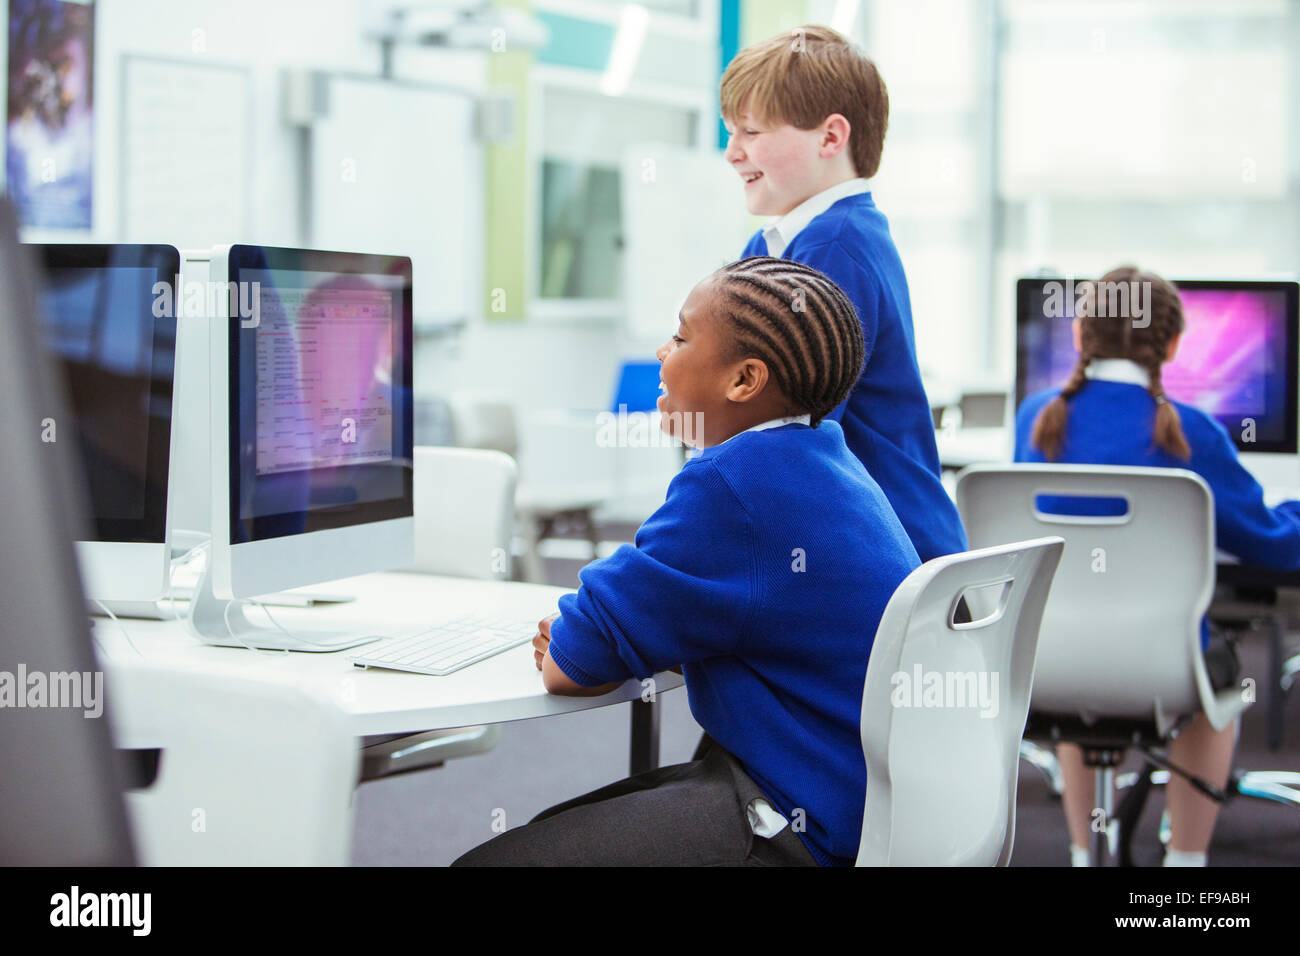 Elementary school children working with computers Stock Photo